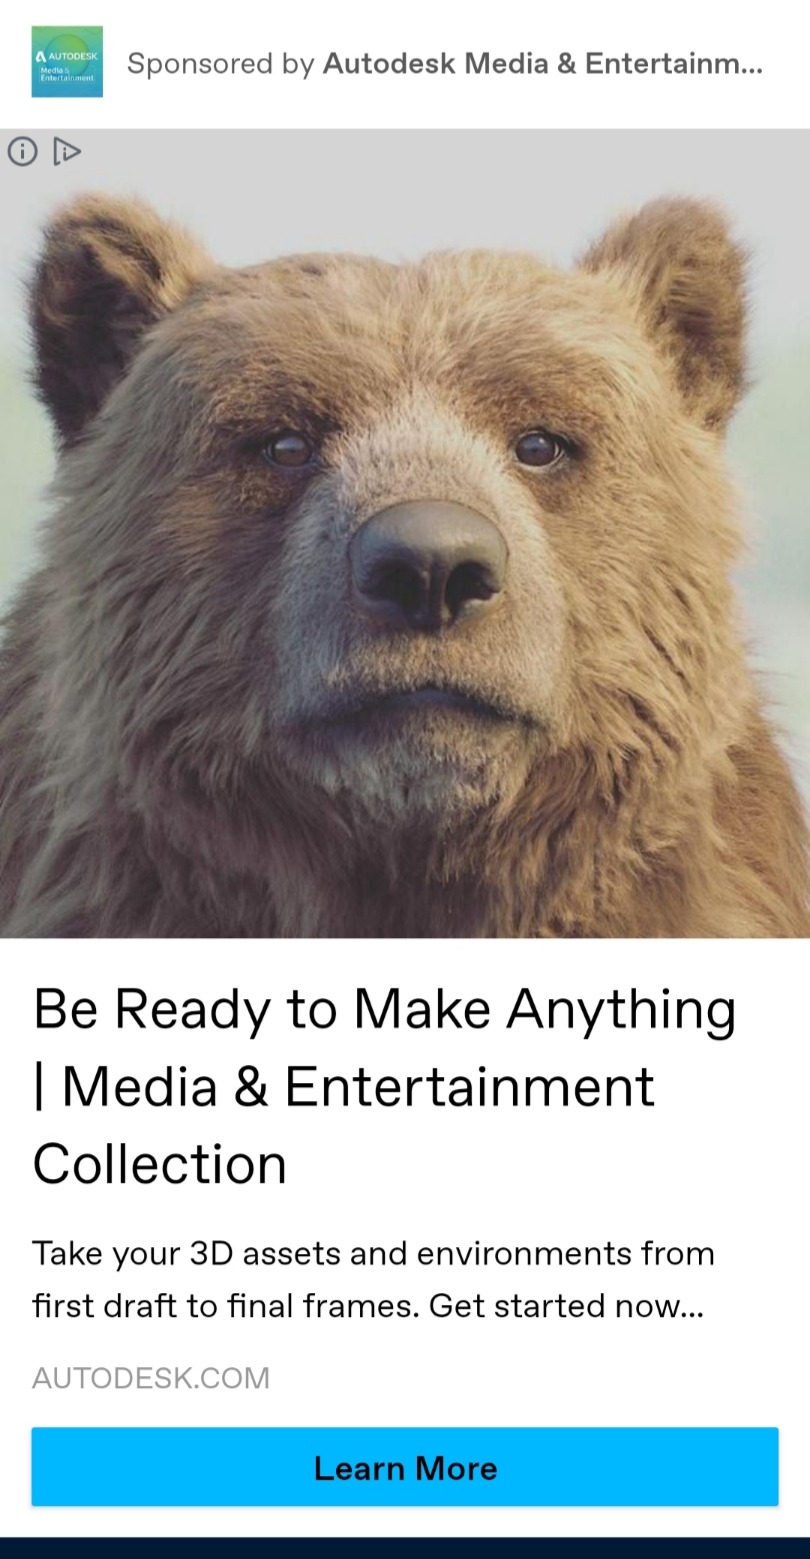 Ah, I see you&rsquo;re trying to exploit my love of bears, Autodesk